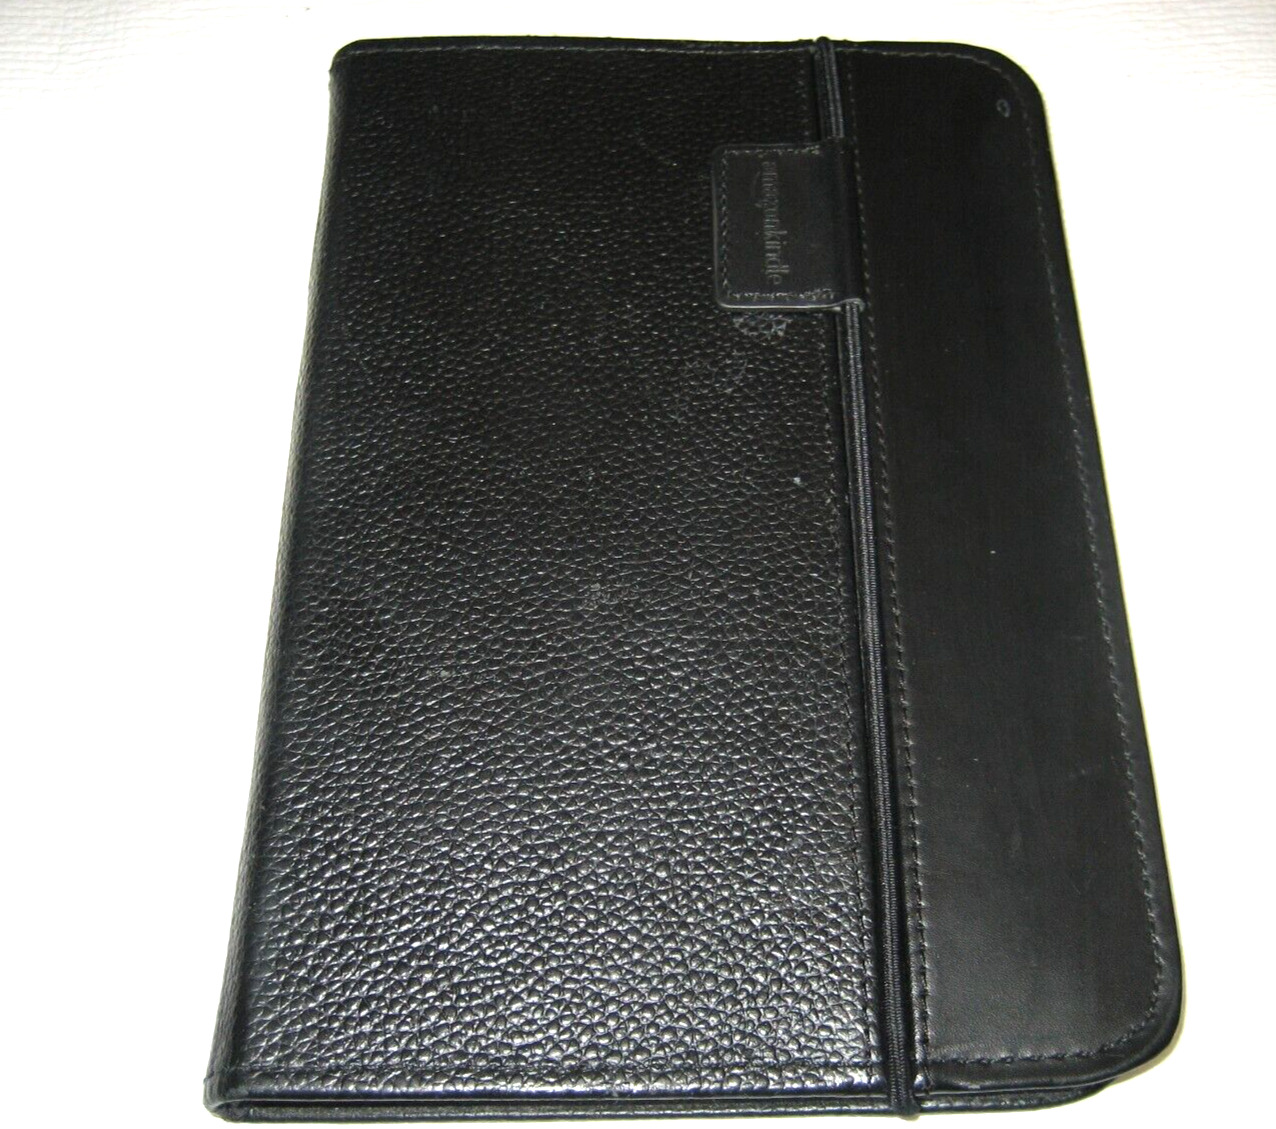 Original Amazon Leather Cover Case w/ Light for Kindle Keyboard 3 3rd Generation